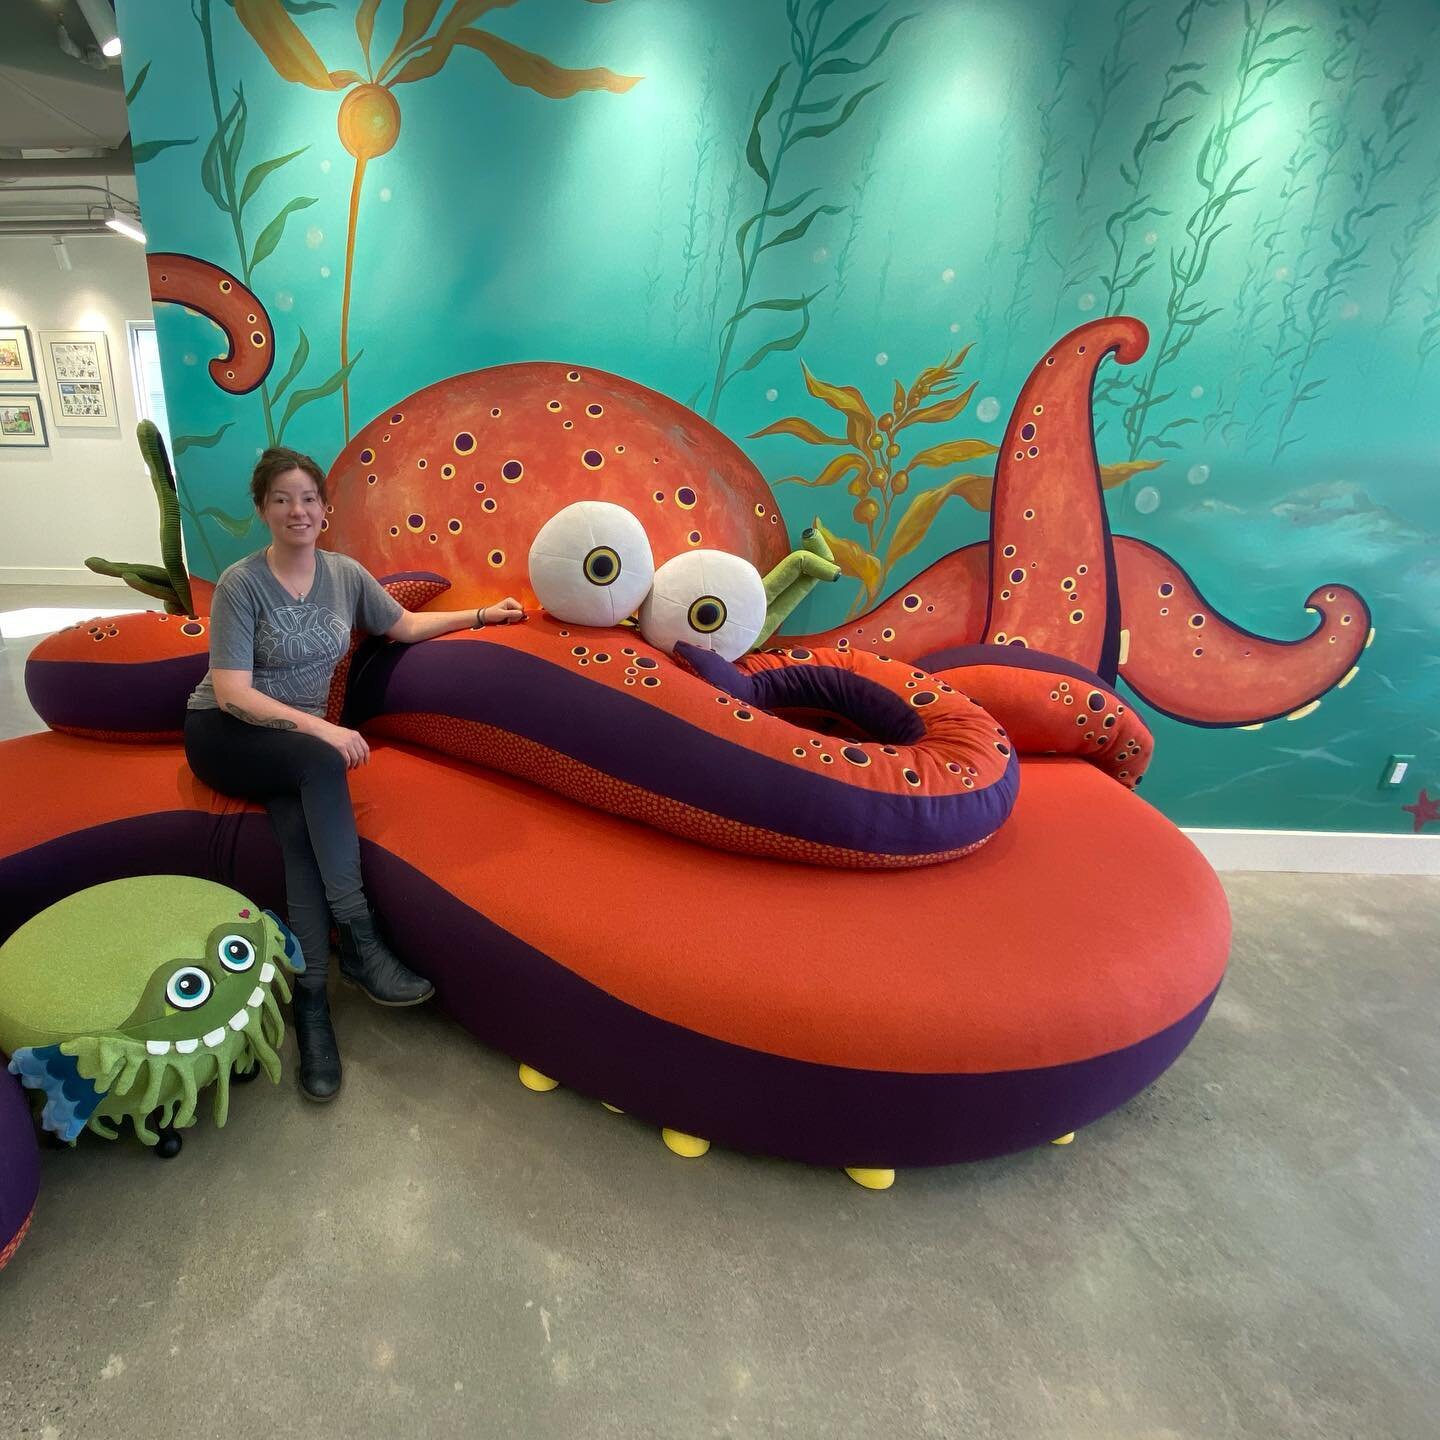 Octopus couch /Mural 🐙 🎨 It was a real treat to paint this mural at the studio of Canadian comic artist Lynn Johnston - who wrote For Better For Worst for nearly 3 decades! It was inspiring to hear her stories and to see how her creativity continue